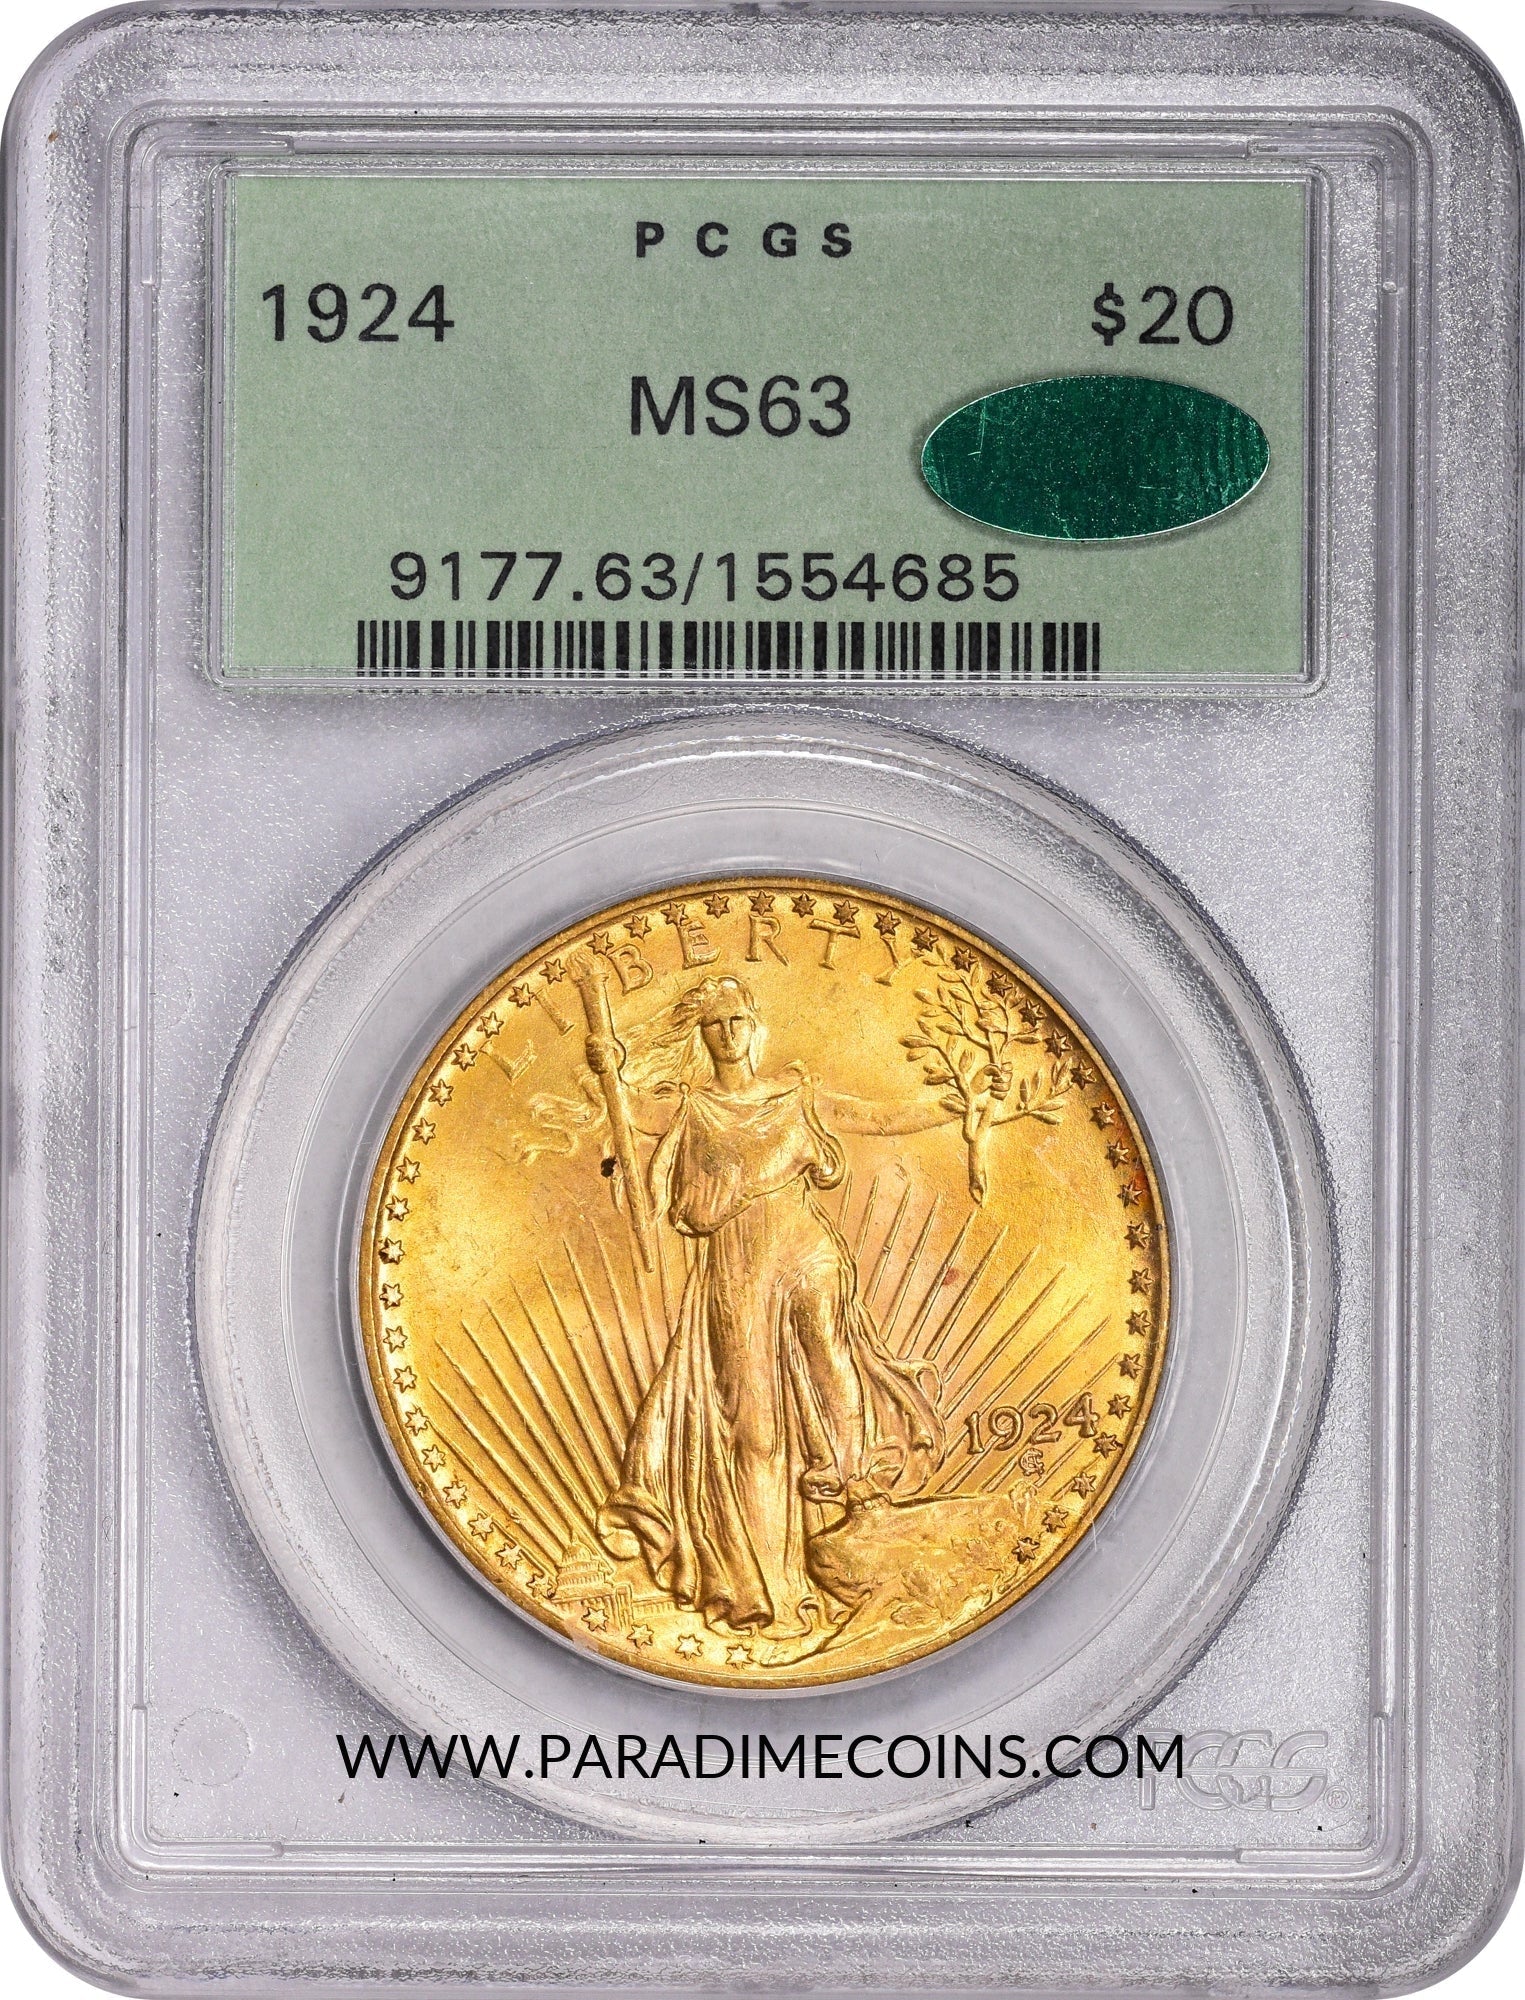 1924 $20 MS63 OGH PCGS CAC - Paradime Coins | PCGS NGC CACG CAC Rare US Numismatic Coins For Sale